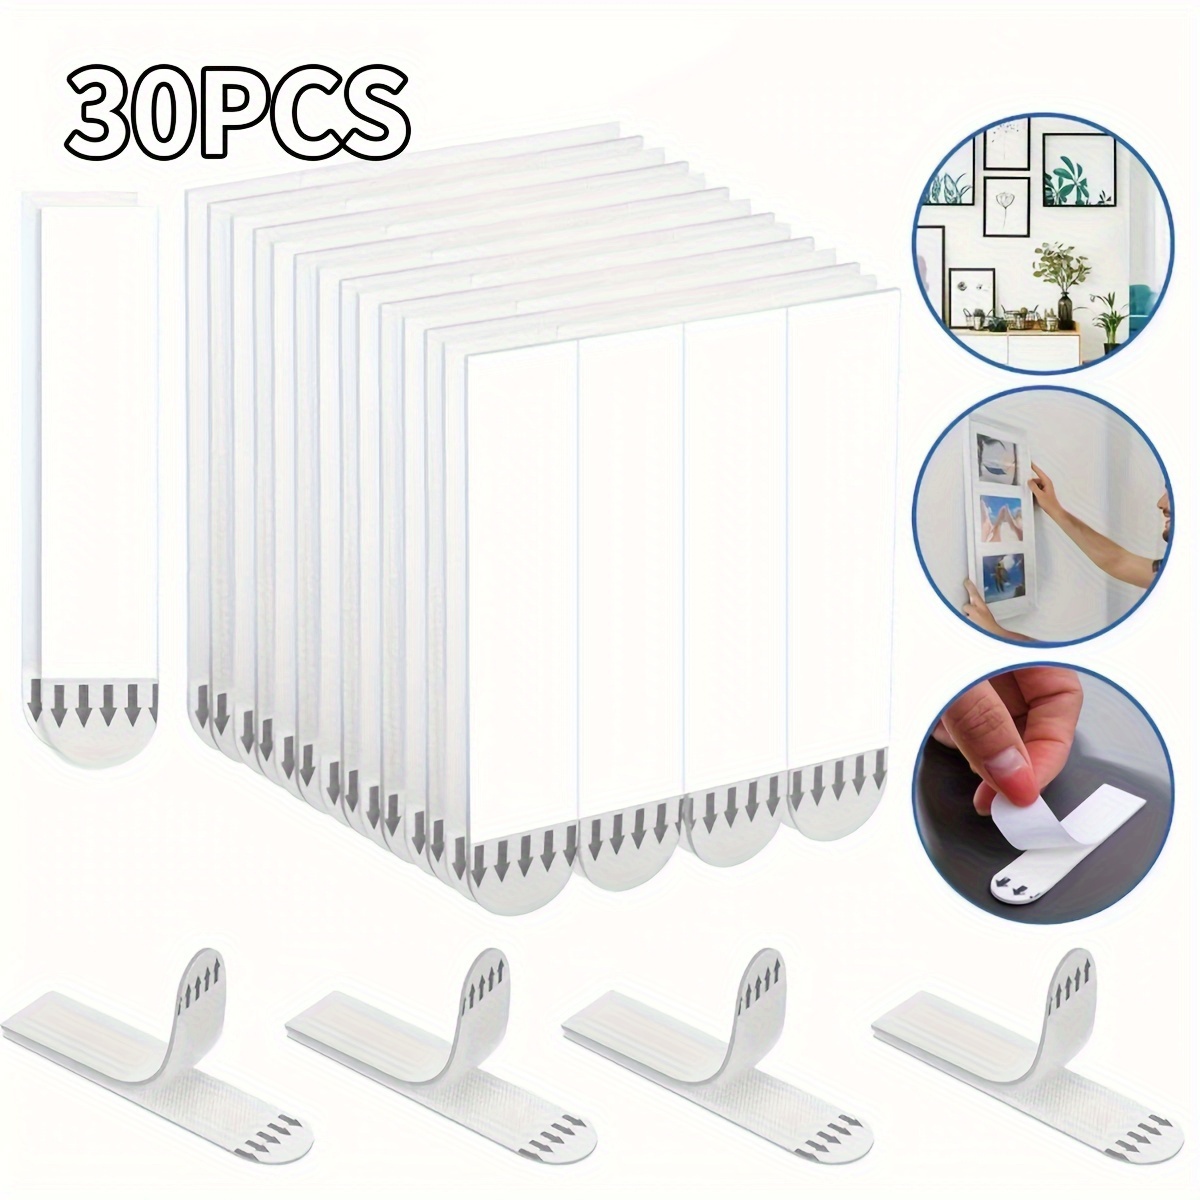 

30-piece Double-sided Removable Adhesive Tape For Picture Frames - Waterproof, No-residue White Foam Strips For Wall Mounting & Clothing